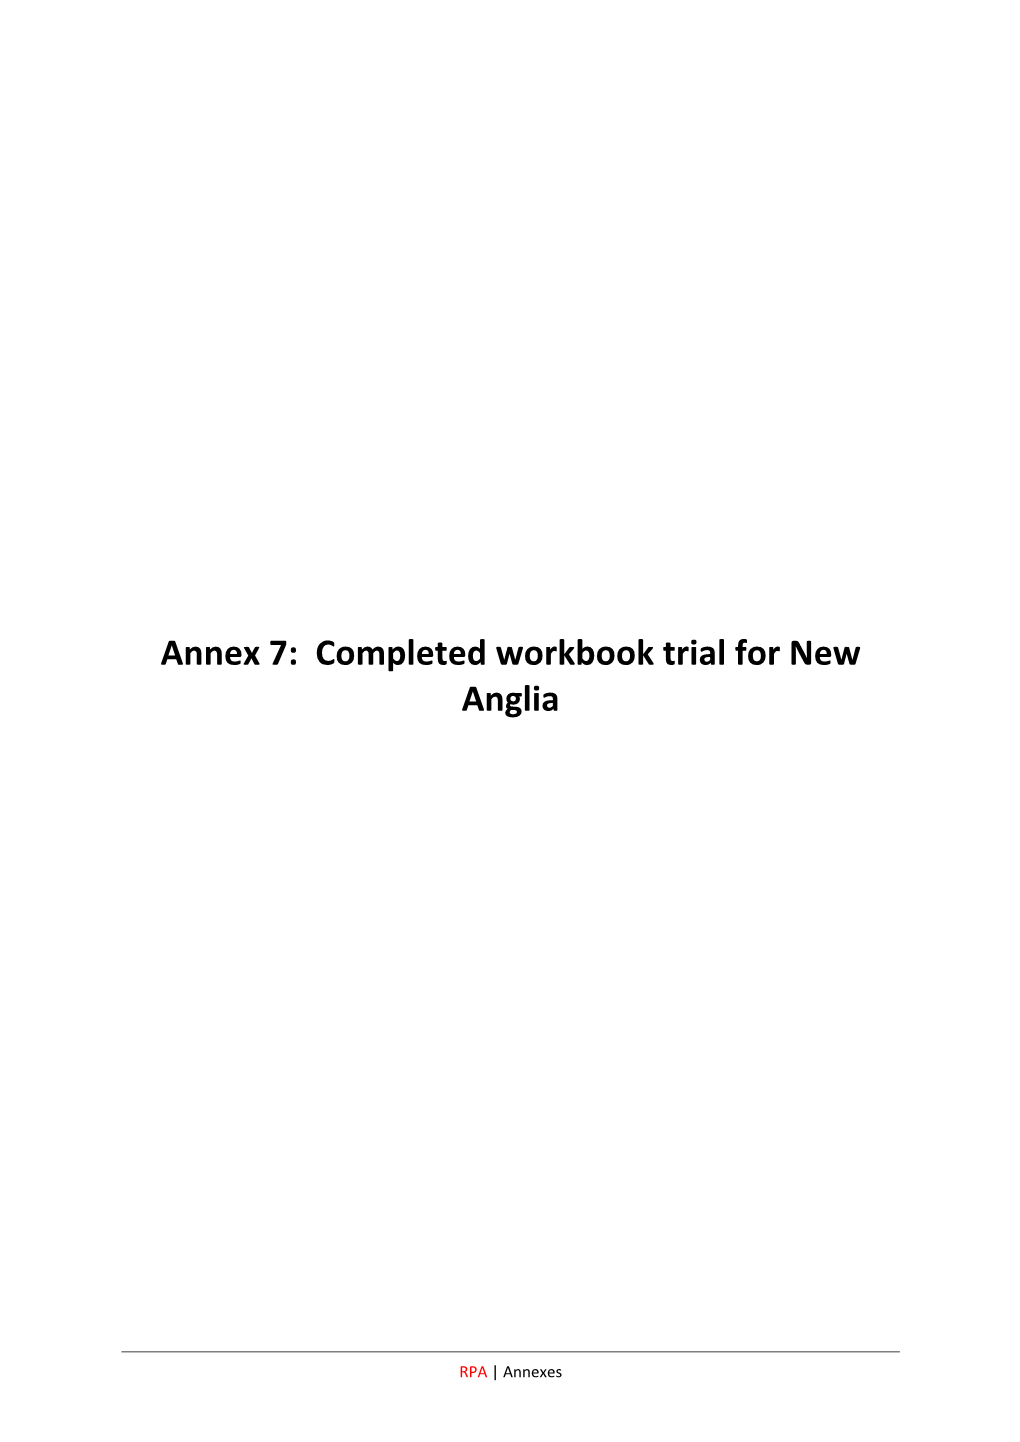 Annex 7: Completed Workbook Trial for New Anglia